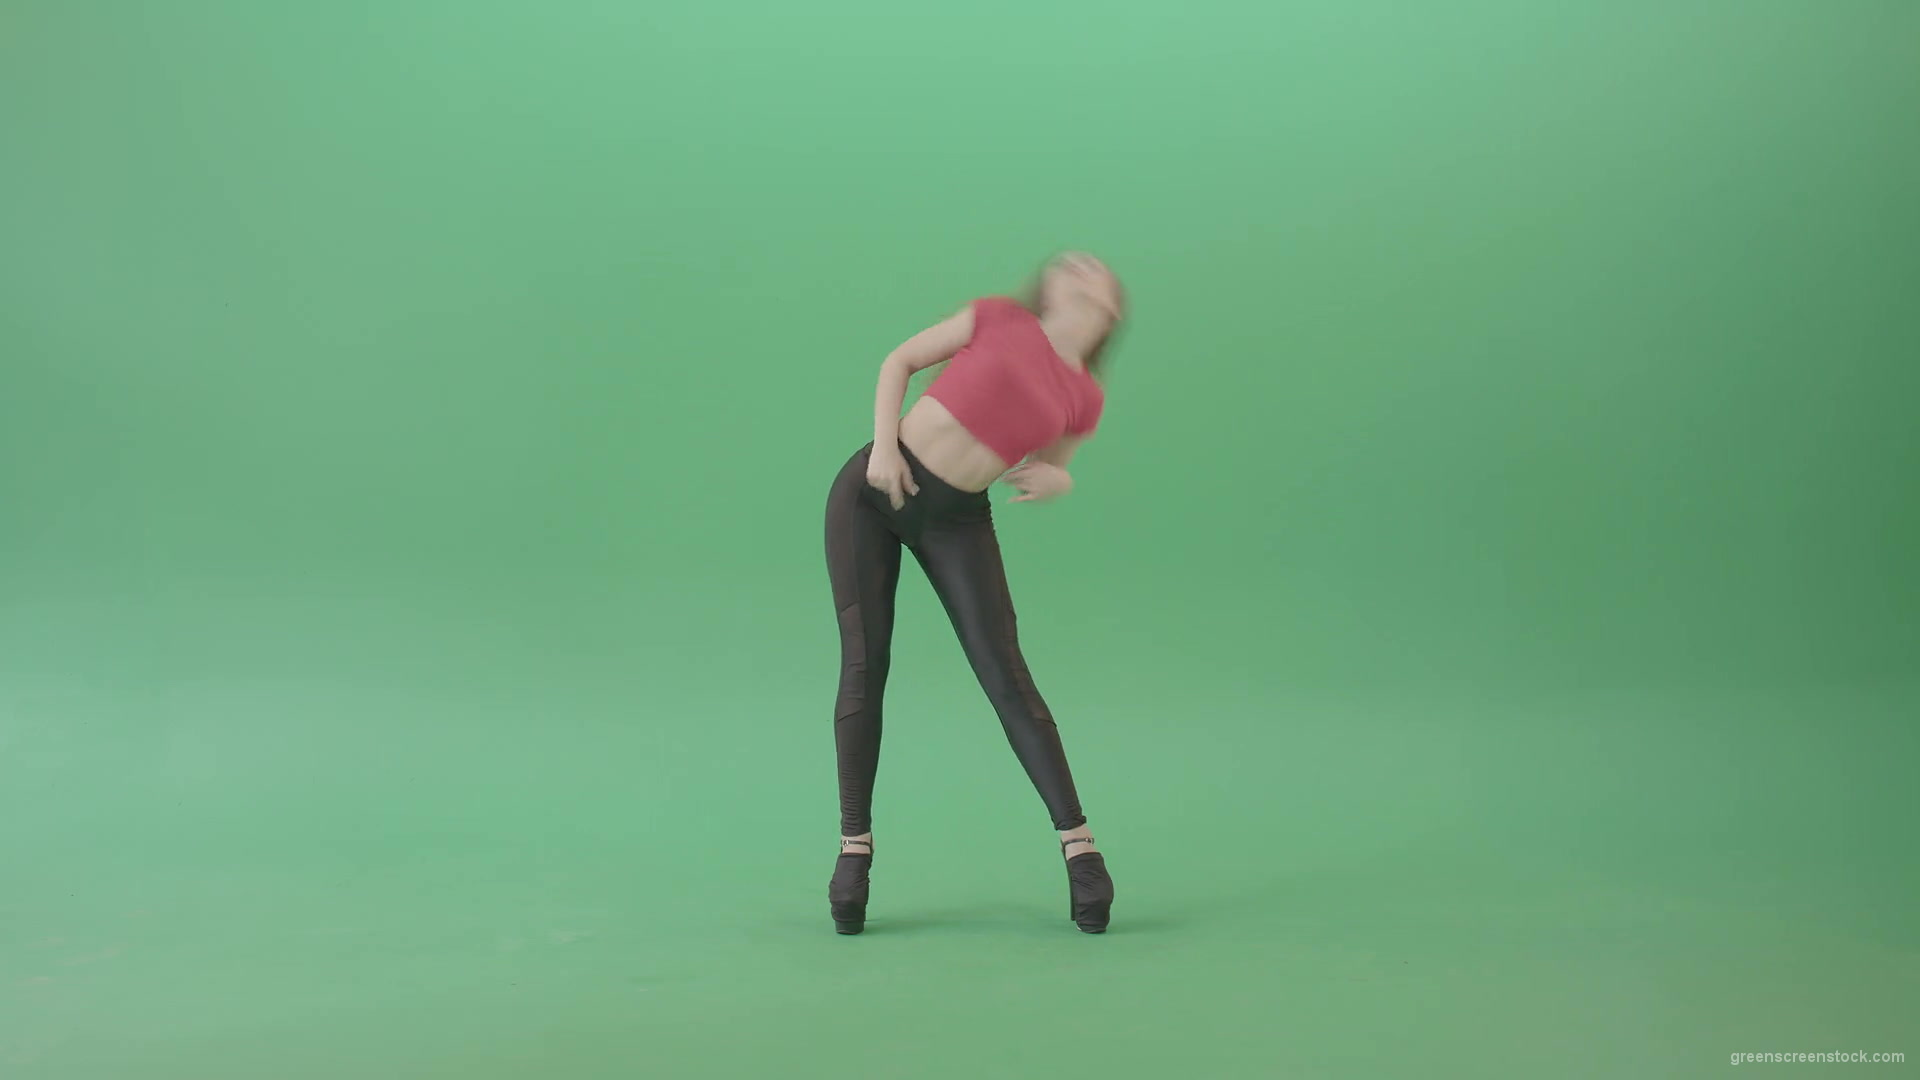 Body-wave-by-strip-dance-girl-on-green-screen-chromakey-4K-Video-Footage-1920_009 Green Screen Stock